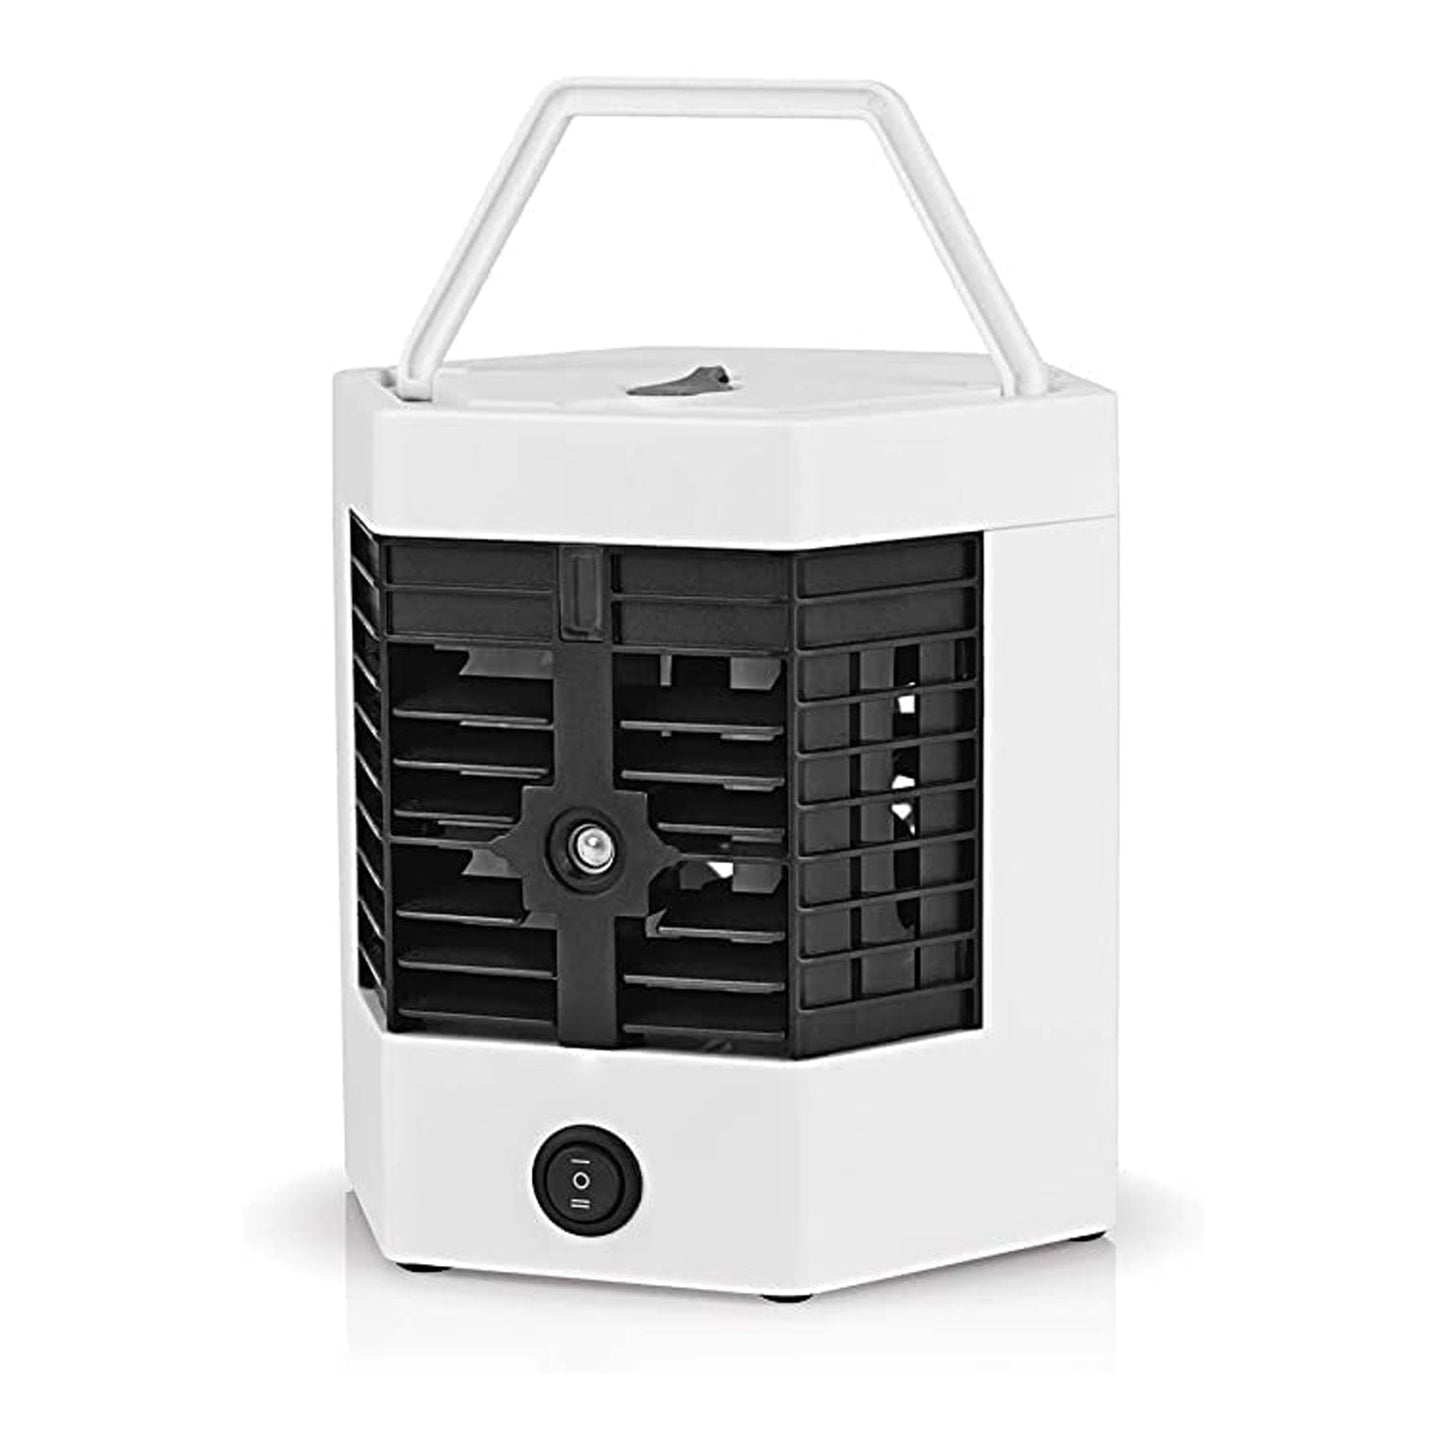 1488 Mini Air Conditioner ARCTIC COOLER Air Cooler Humidifier Mini Portable Air Cooler Fan Arctic Air Personal Space Cooler The Quick & Easy Way to Cool Any Space Air Conditioner DeoDap